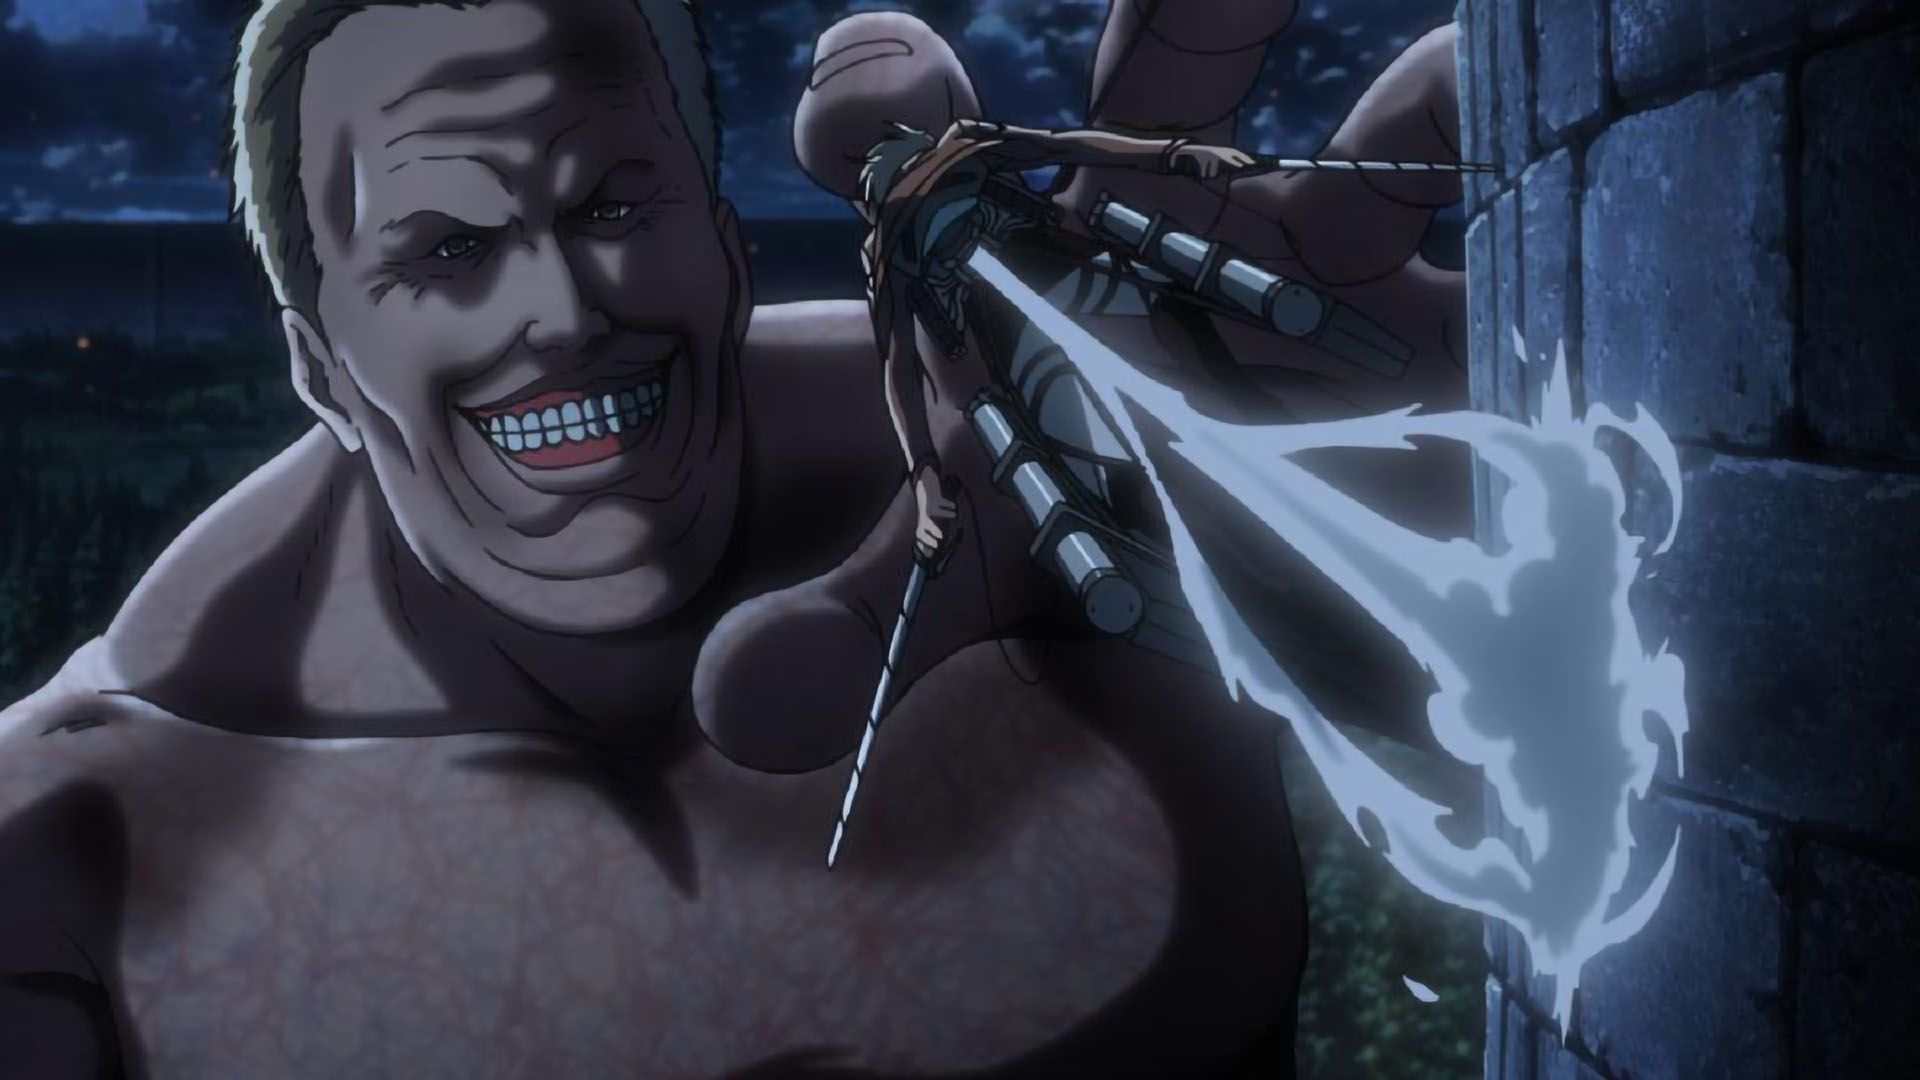 Watch Full Episodes of Attack on Titan, a Part of Toonami on Adult Swim